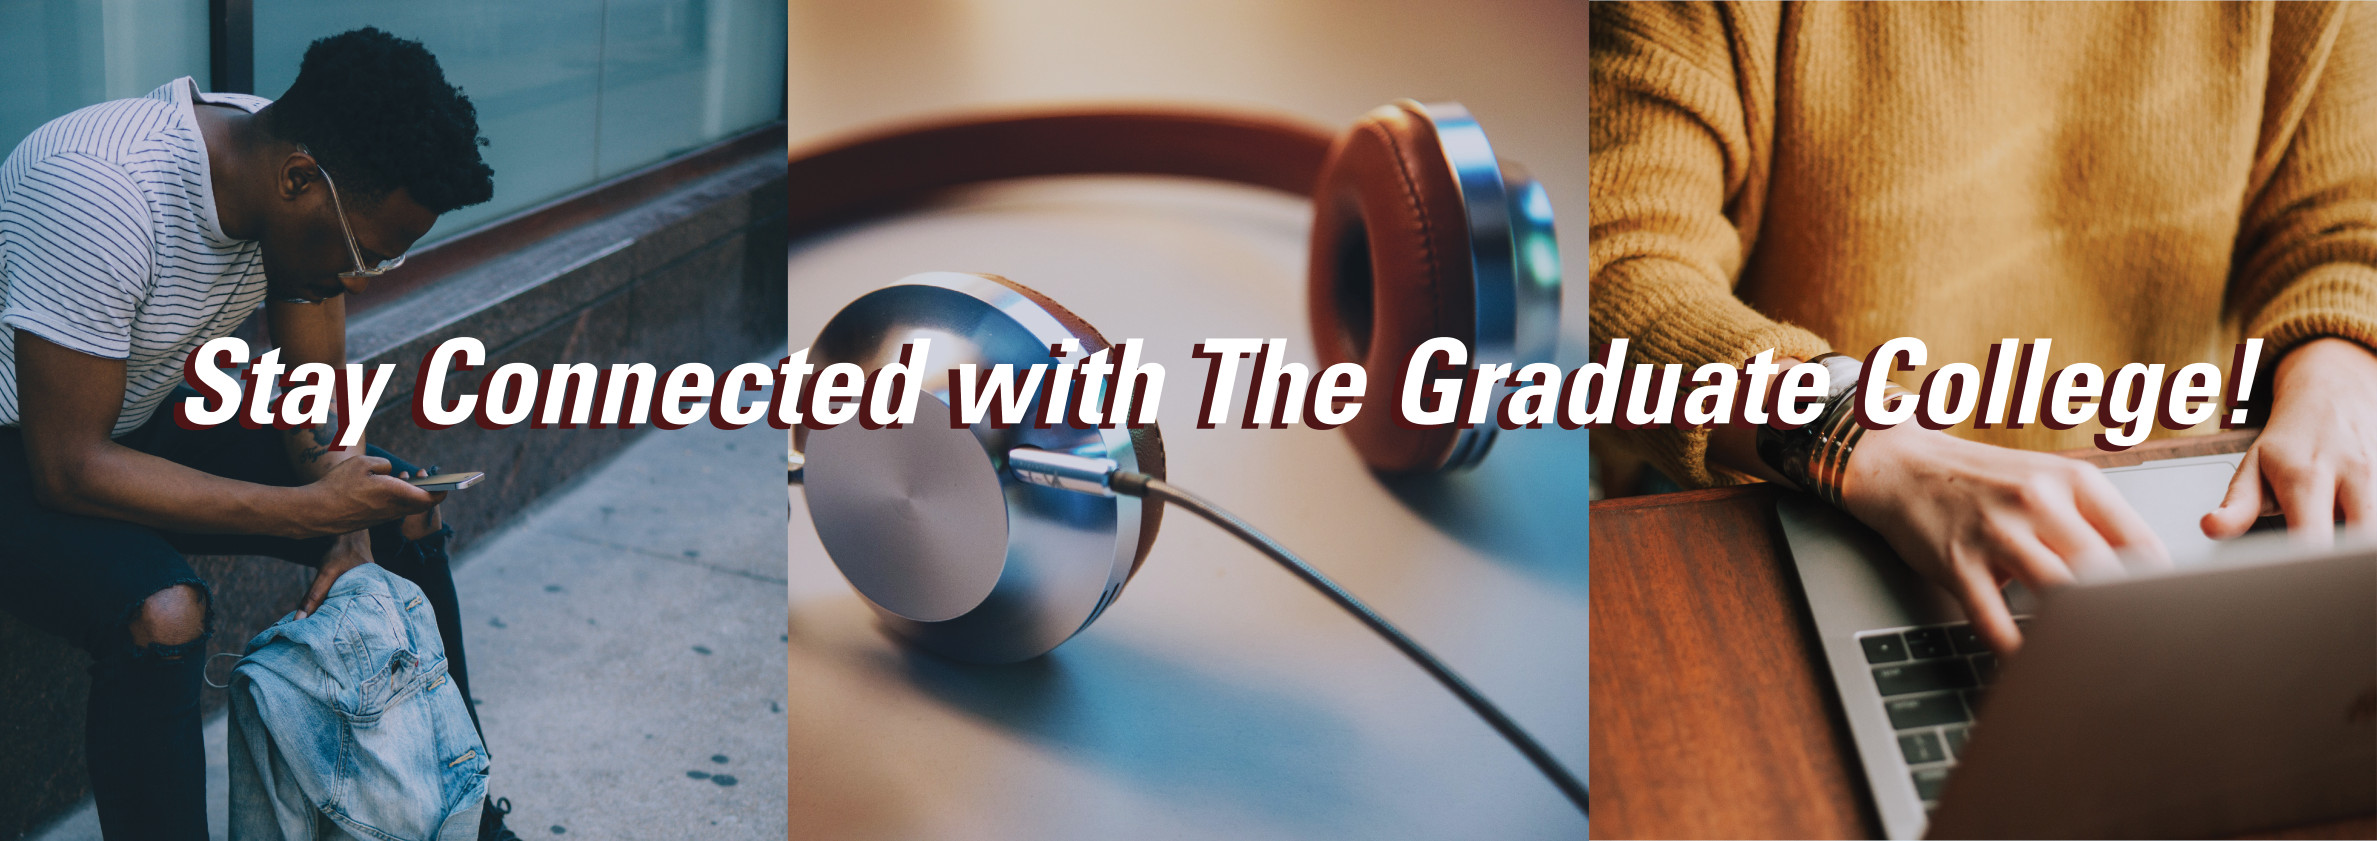 Stay connected with The Graduate College!